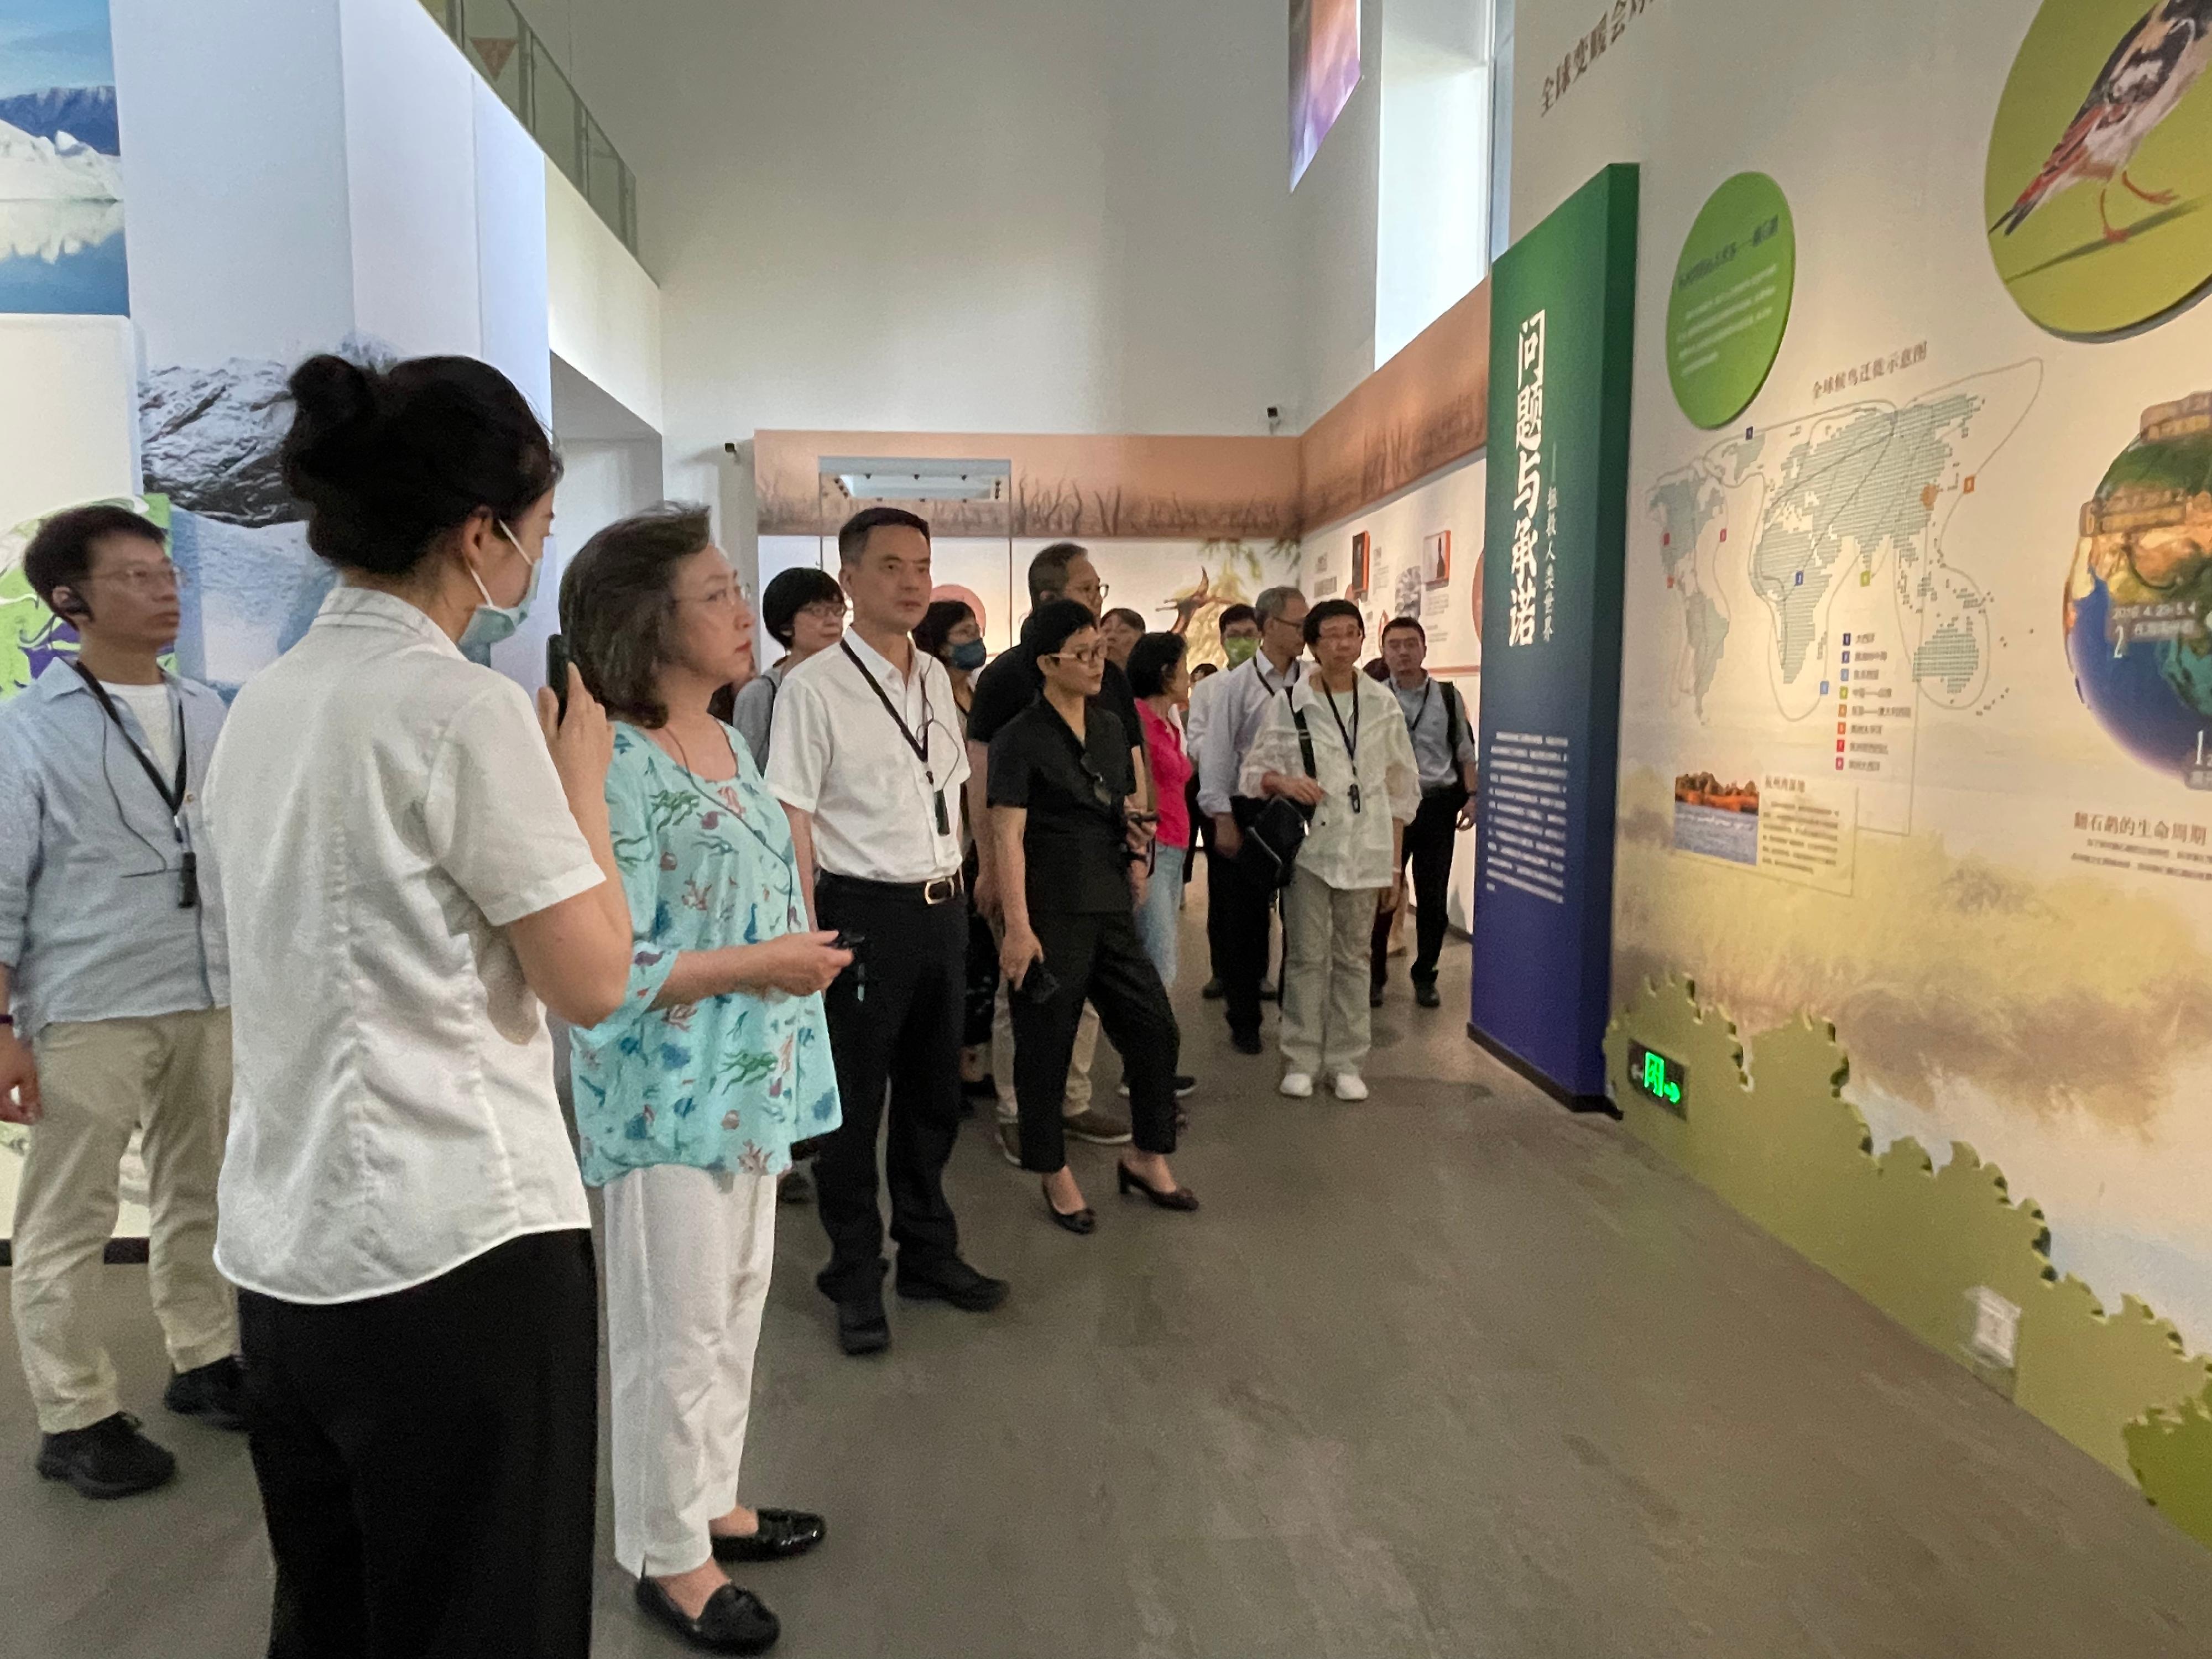 The Secretary for the Civil Service, Mrs Ingrid Yeung, and Permanent Secretaries and Heads of Departments visited the Zhejiang Museum of Natural History today (June 28). Photo shows them listening to a presentation on the work of carbon peaking and carbon neutrality in Zhejiang.
